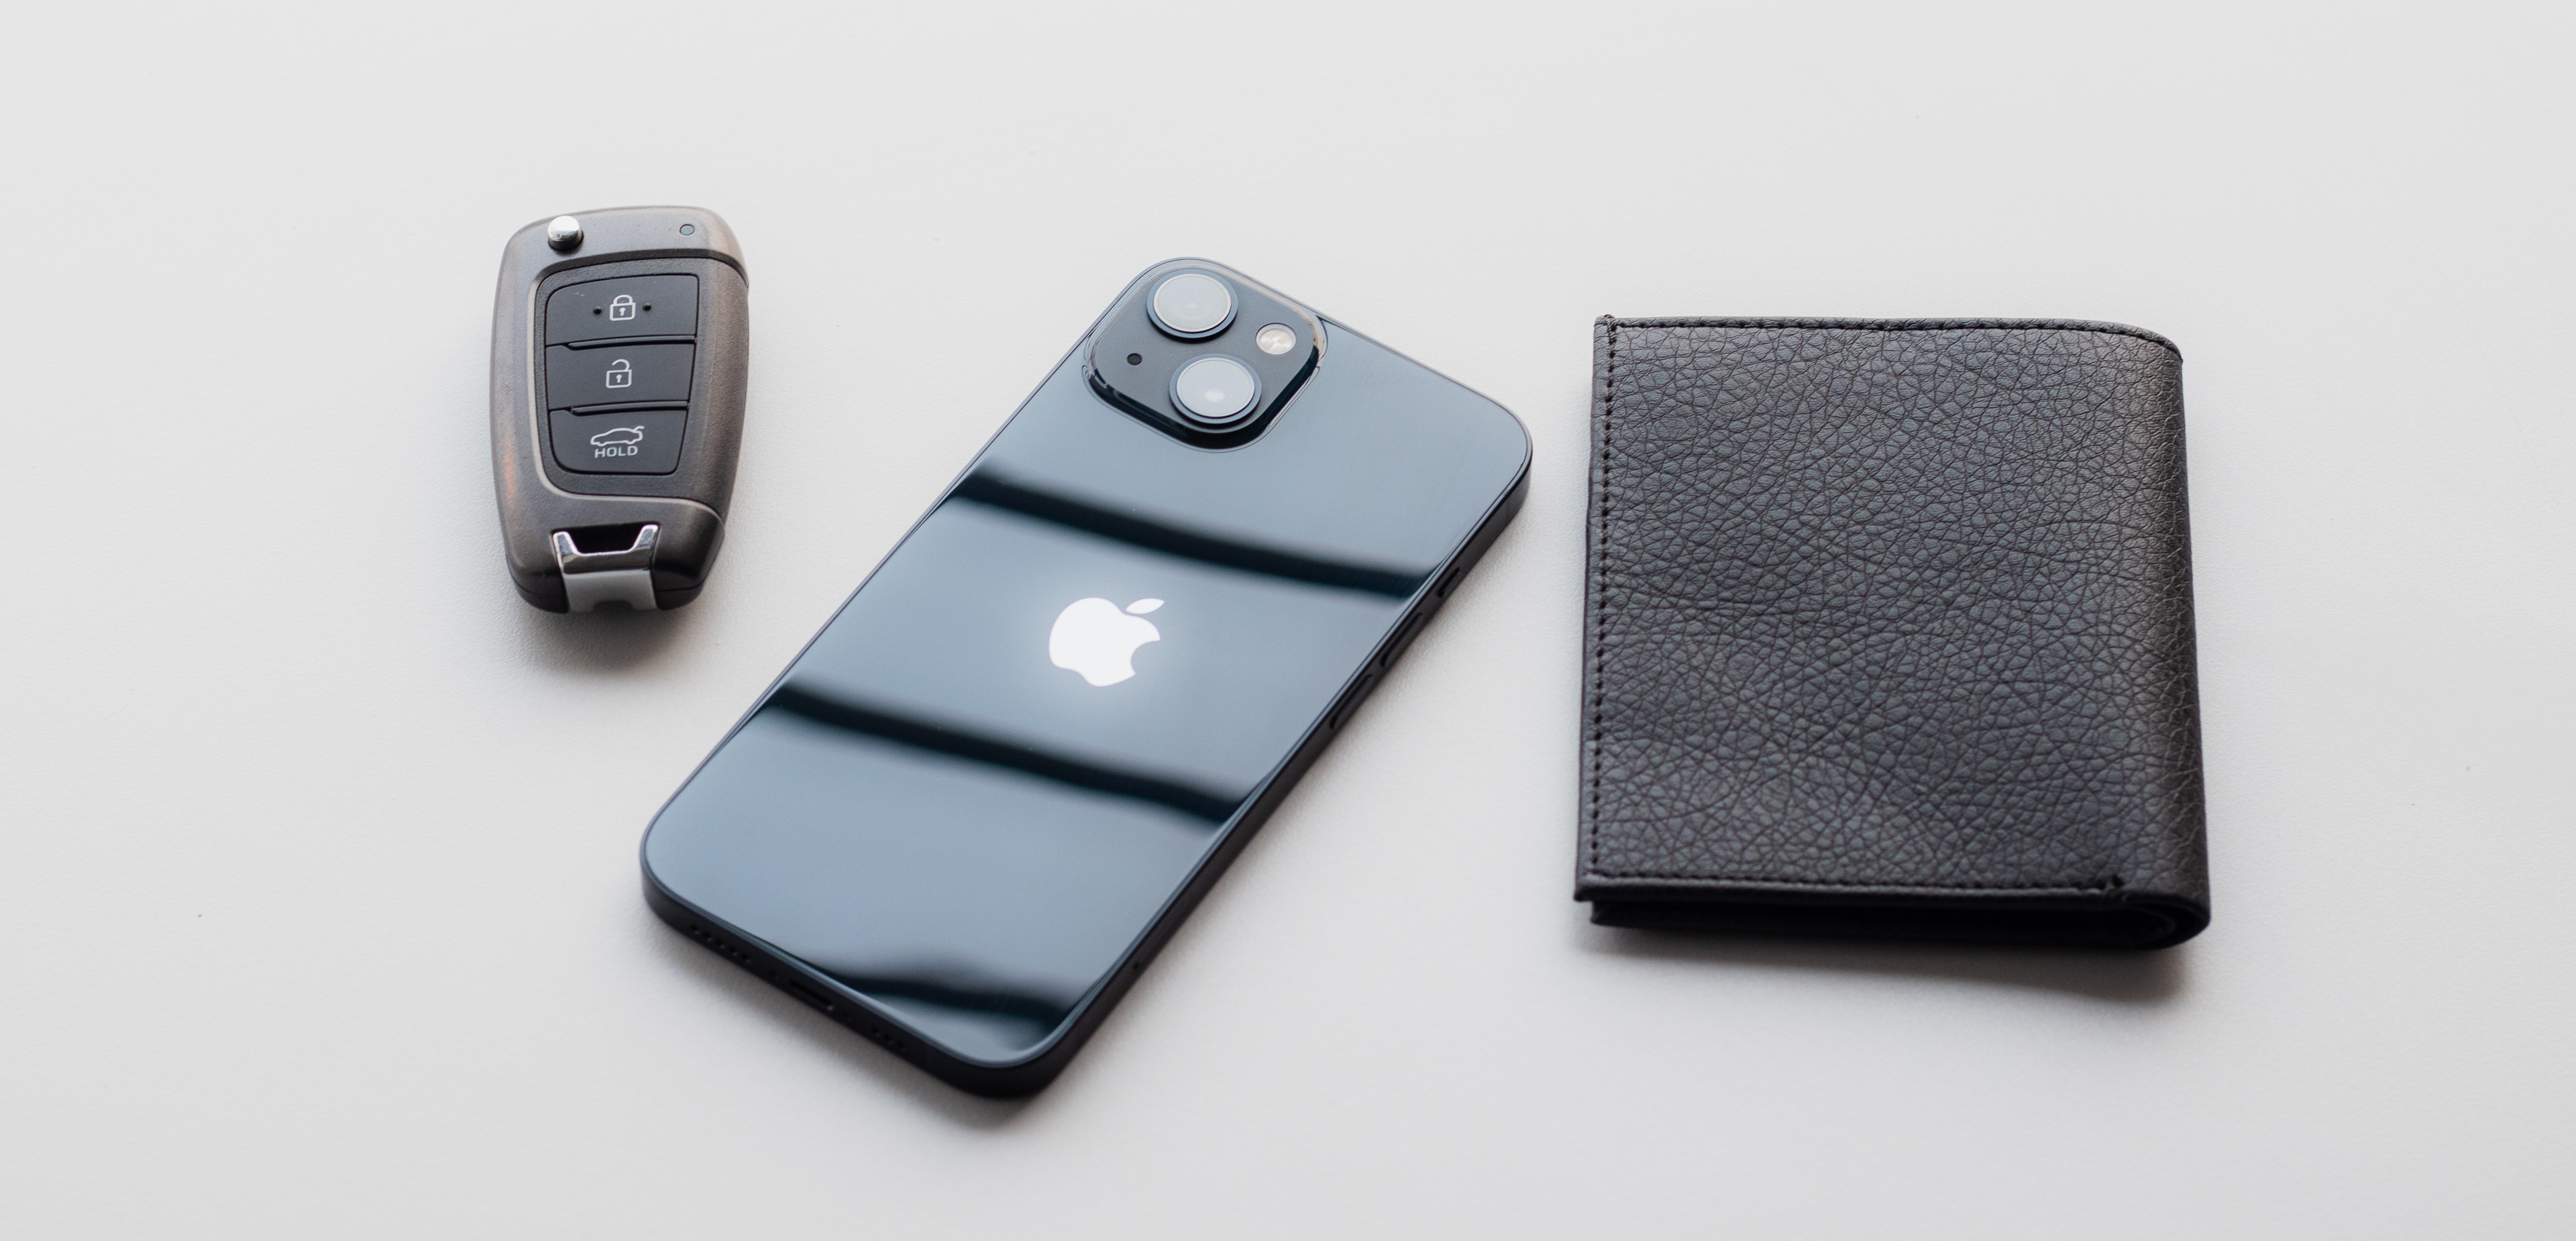 Car key fob, iphone, and wallet sitting side-by-side